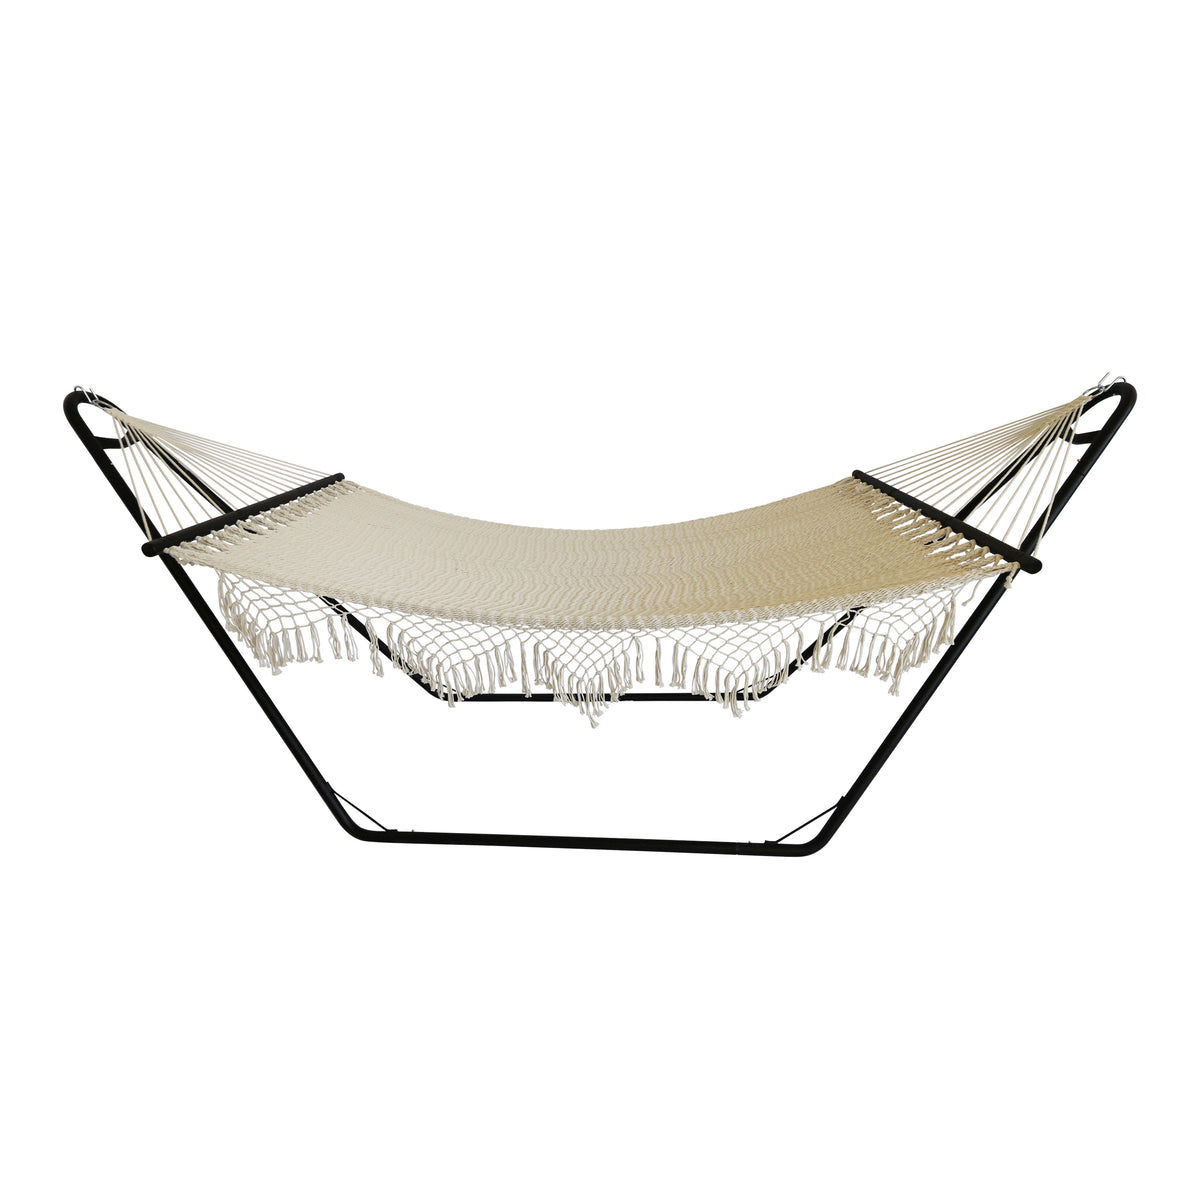 Side view of the Bliss Hammocks 48-inch Tahiti Hammock With Spreader Bars and decorative fringe on the sides.